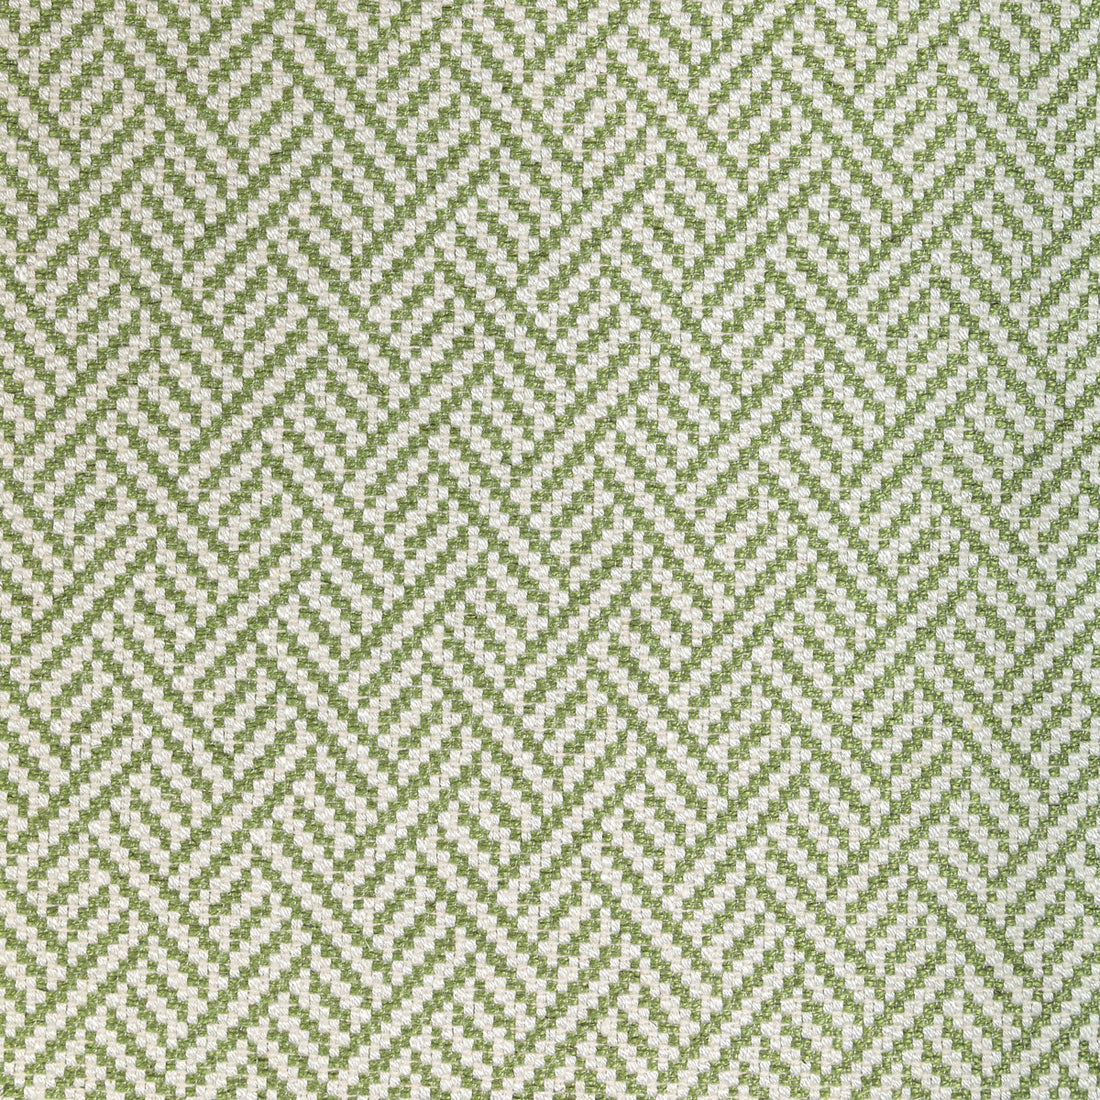 Colbert Weave fabric in celery color - pattern 8022108.3.0 - by Brunschwig &amp; Fils in the Lorient Weaves collection